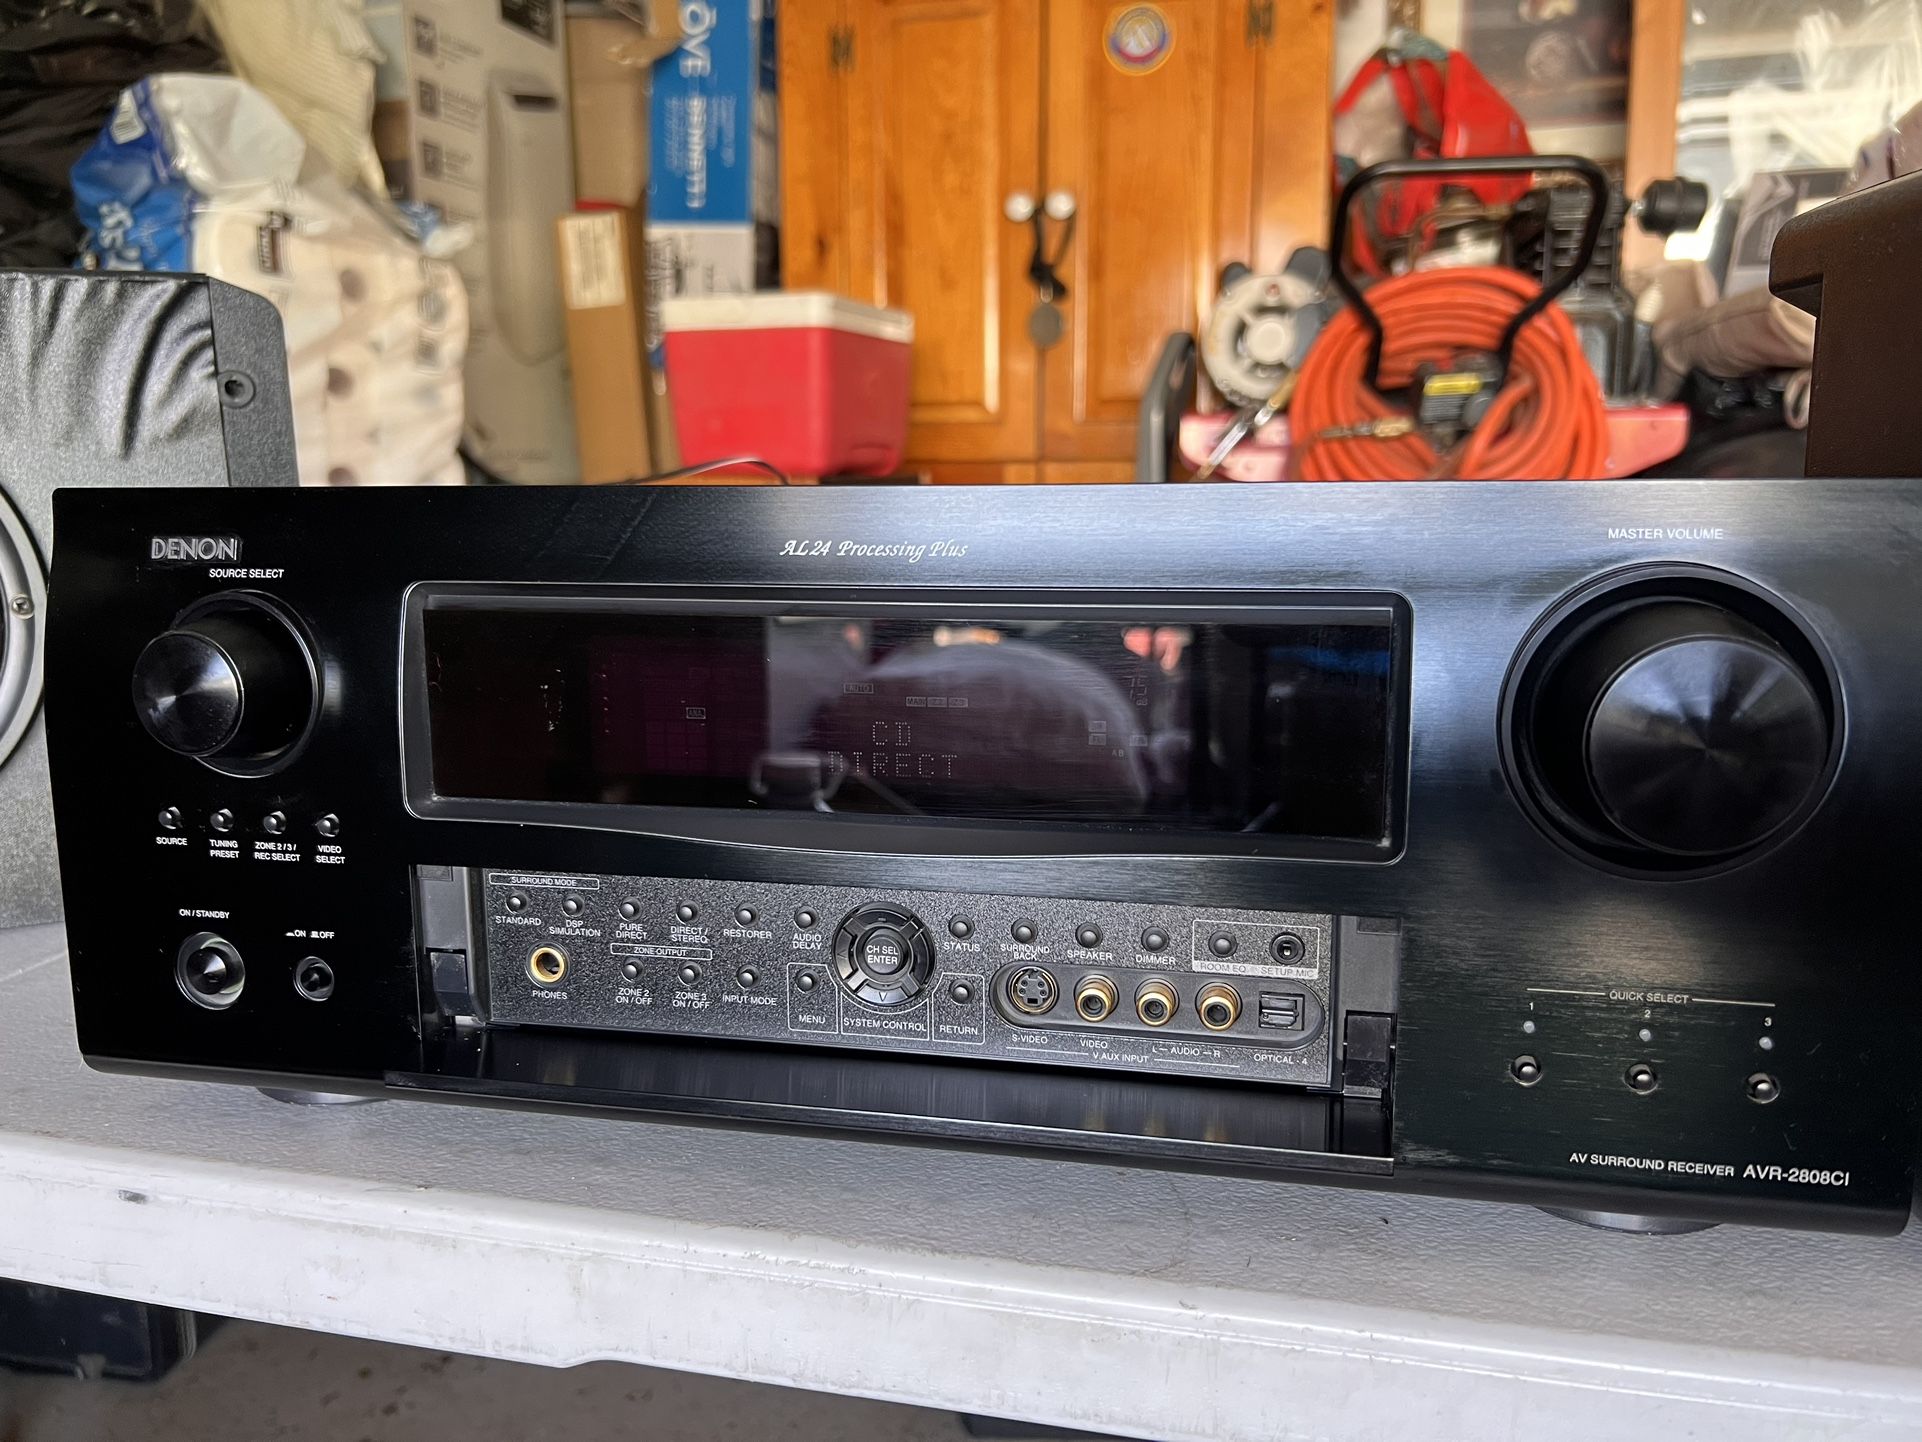 Receiver Massive Receiver Denon Receiver Great Power Amplifier Home Electronic Receiver MAKE AN OFFER!